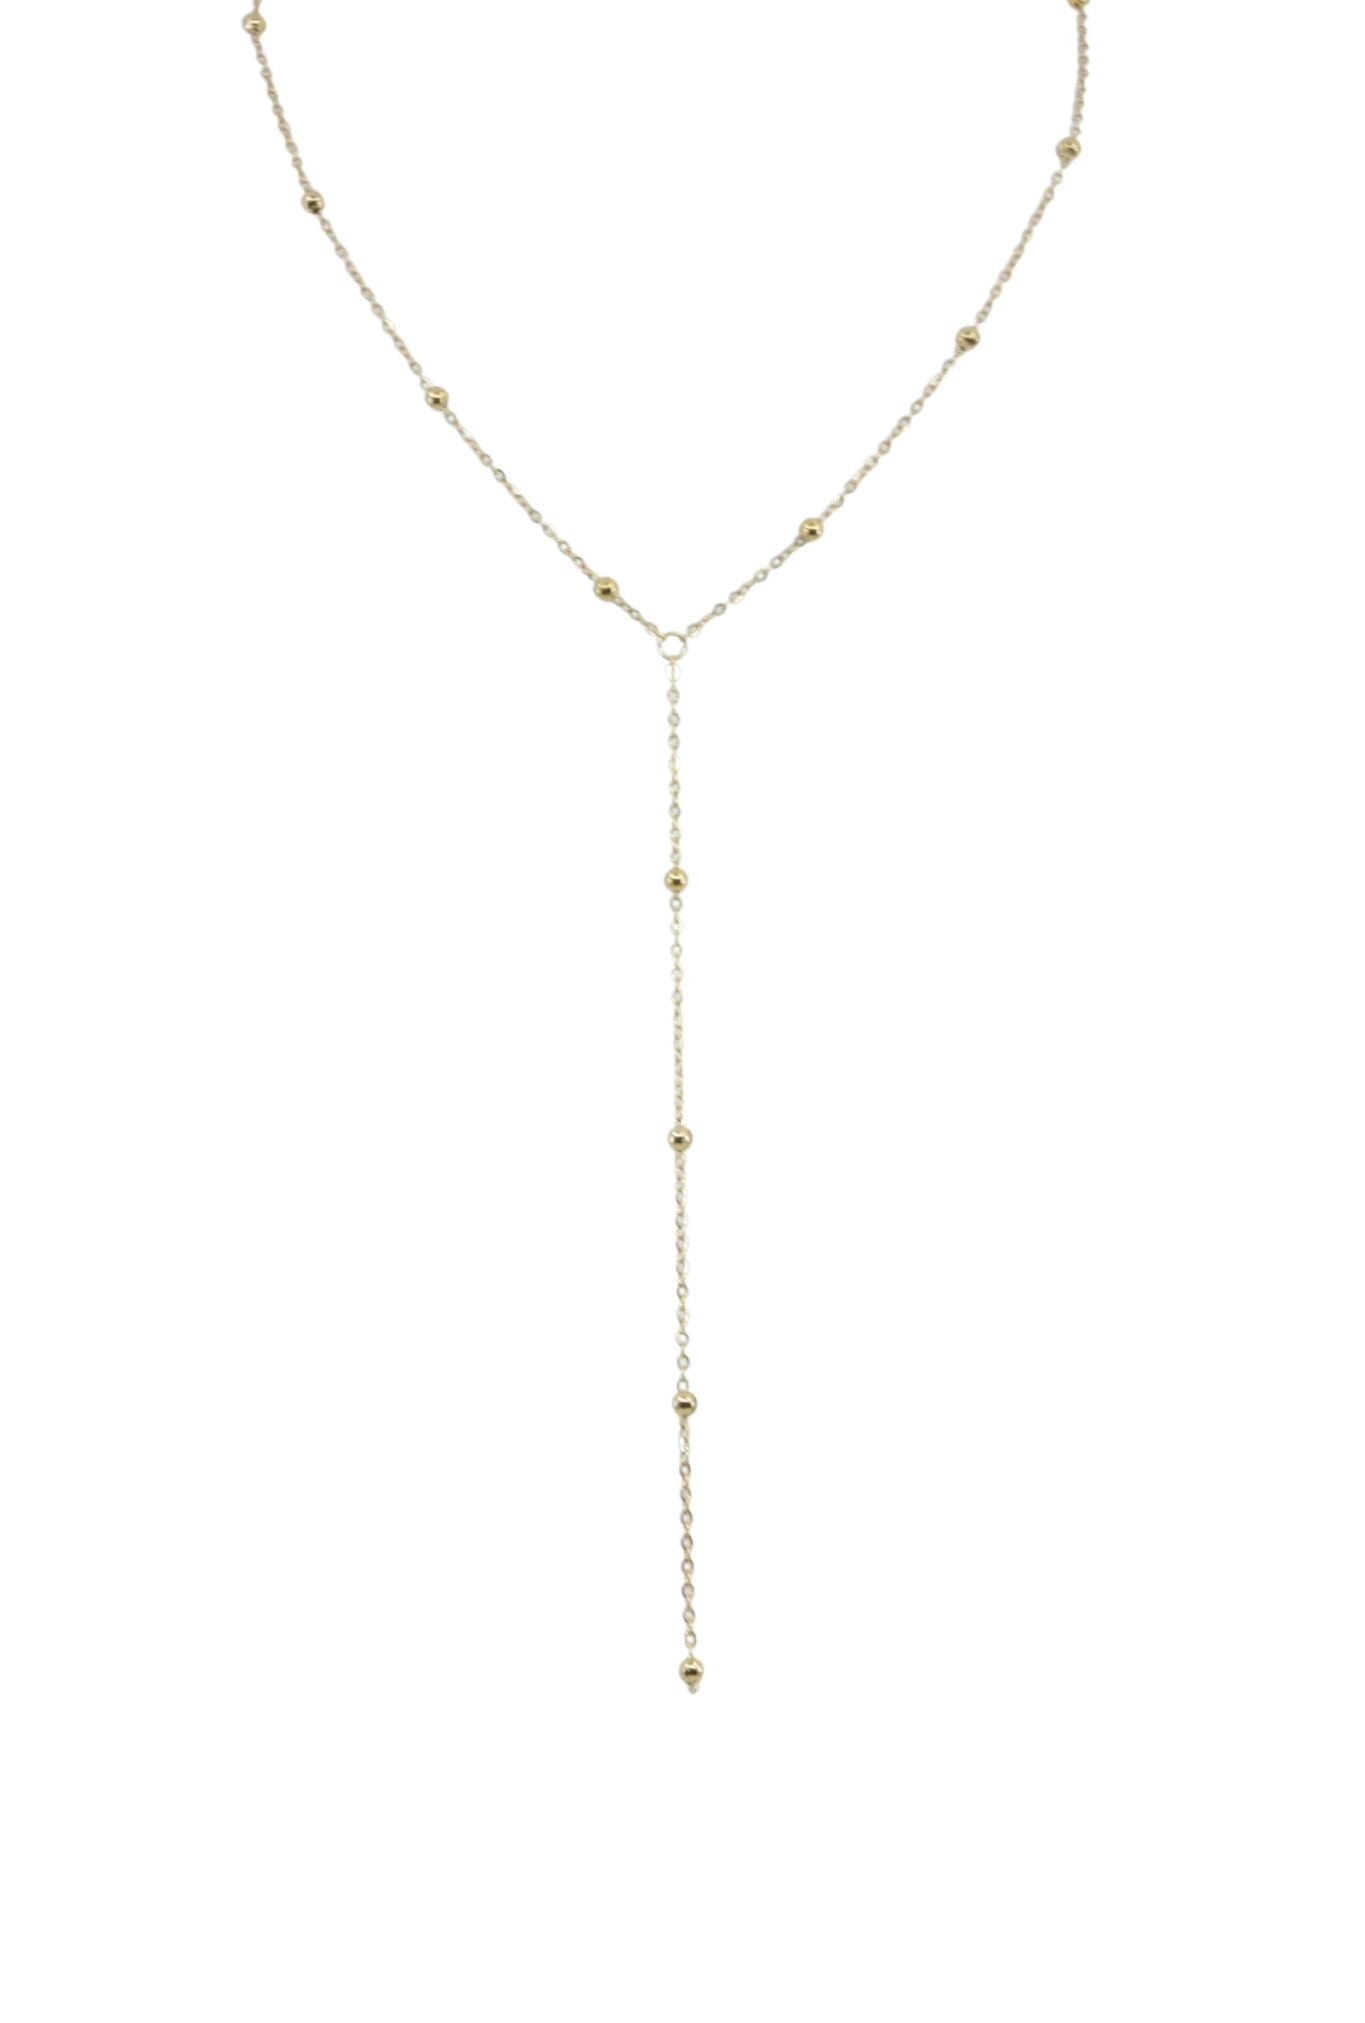 Gold Tassel Necklace with Beads